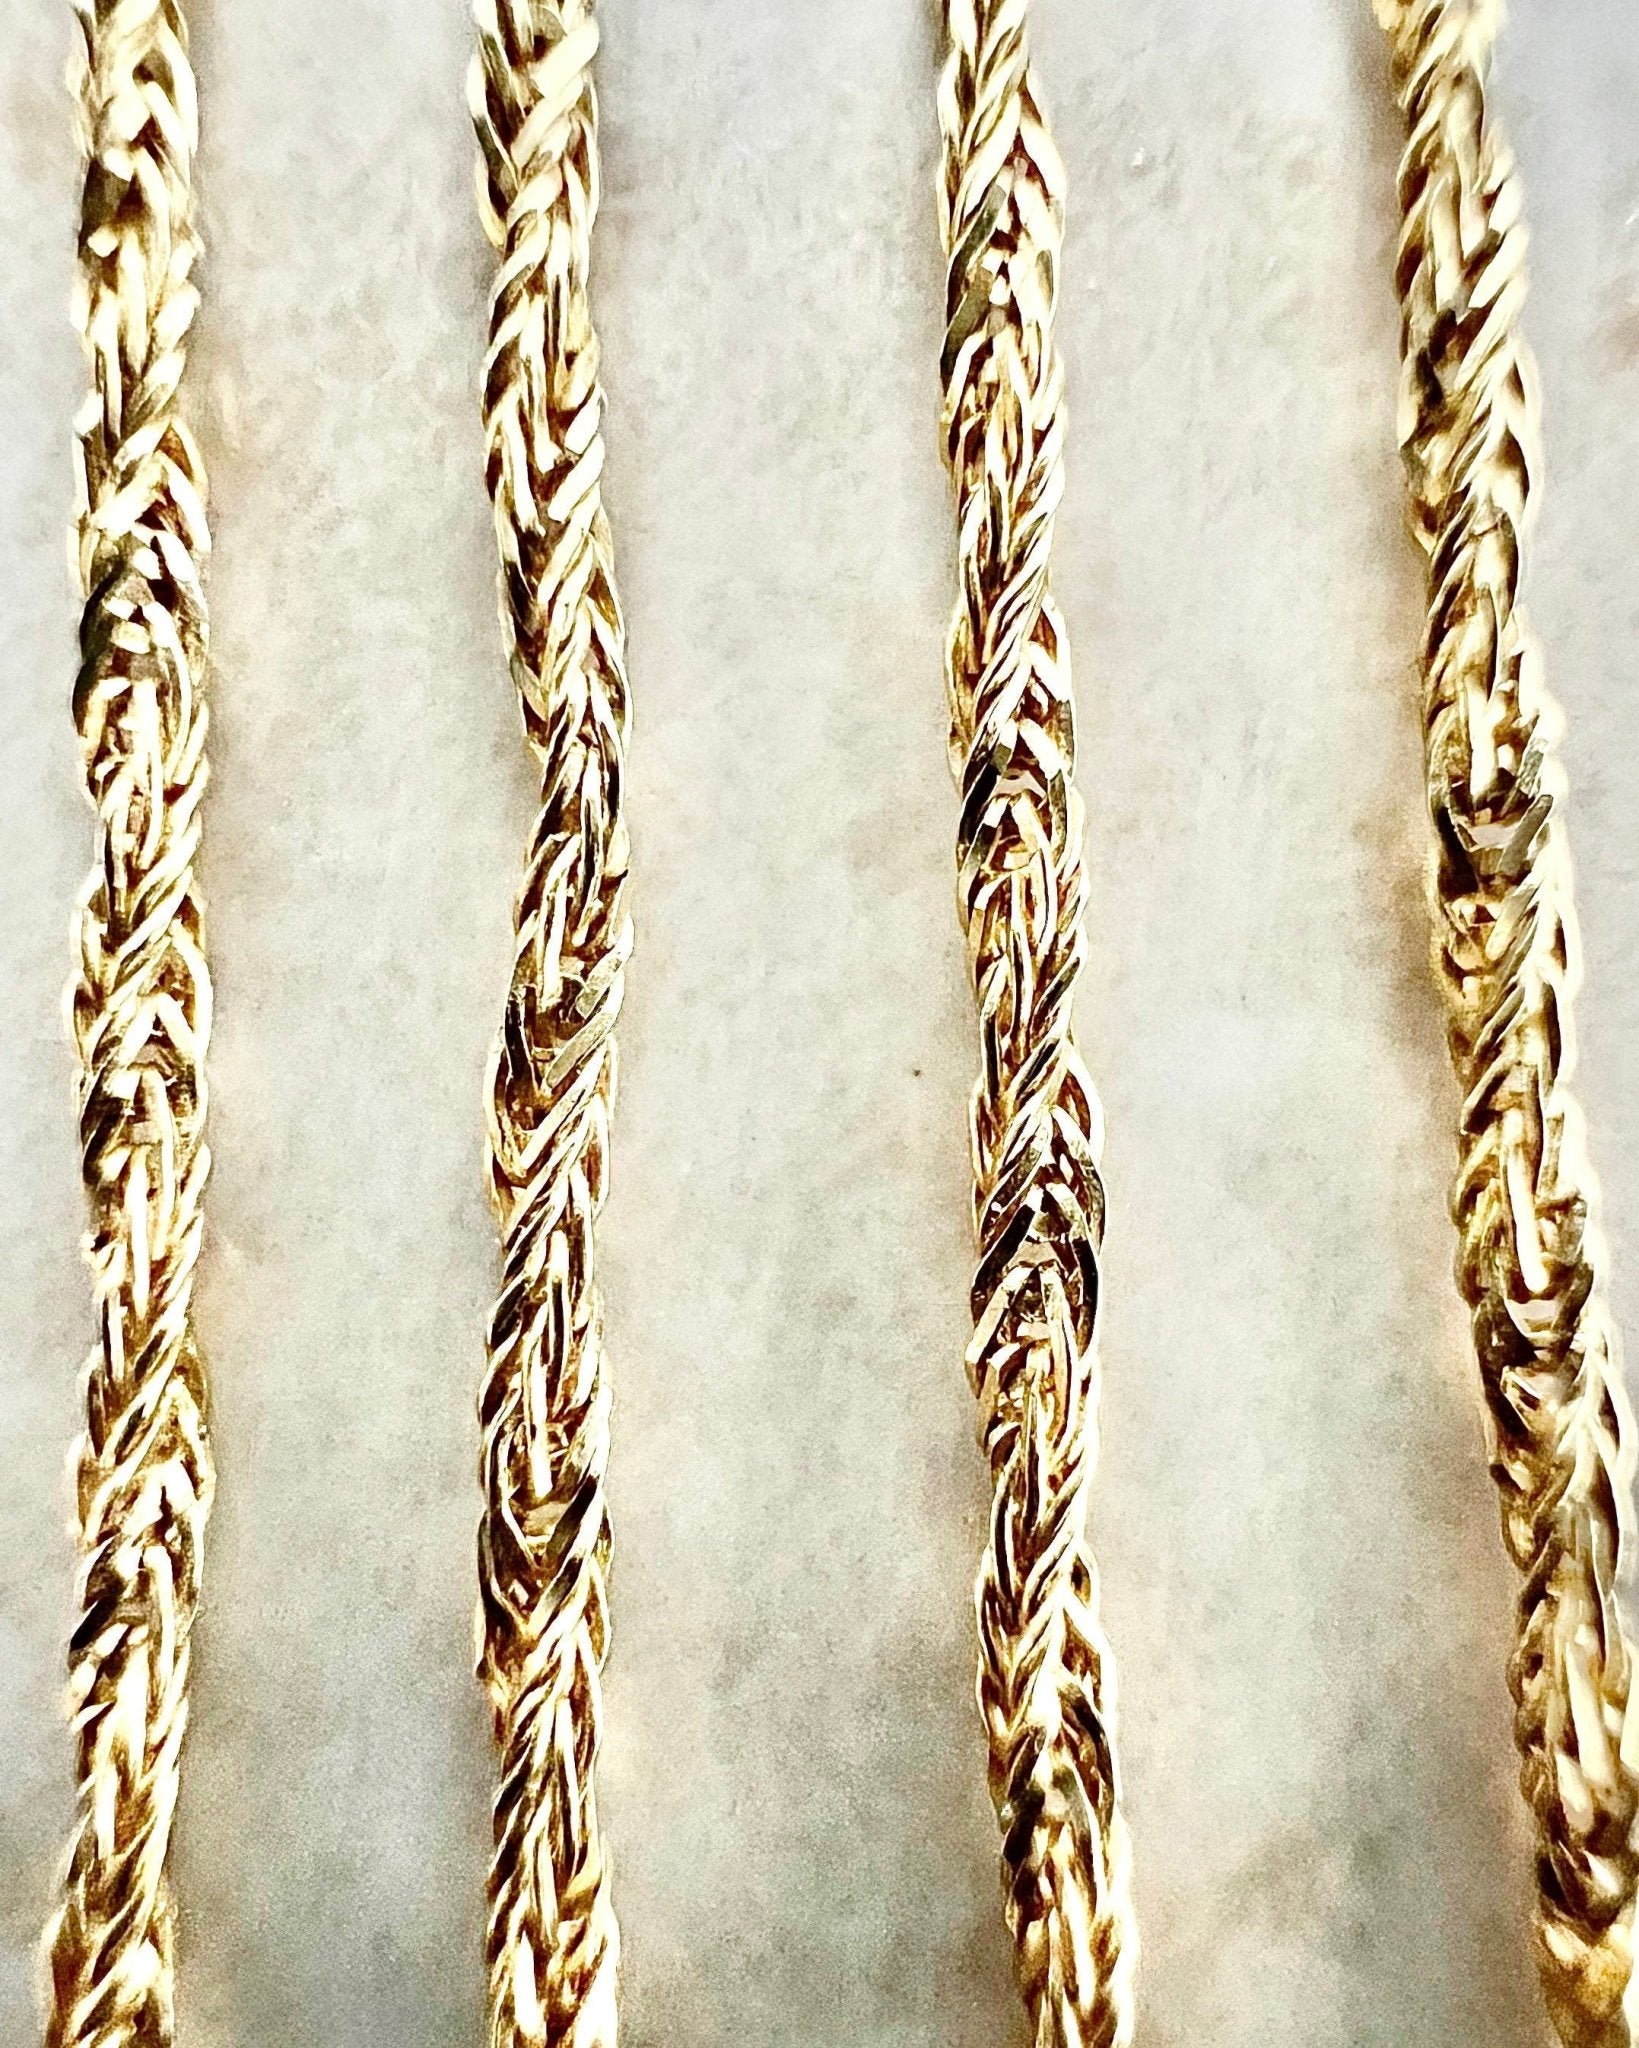 Vintage 18K Yellow Gold Twisted Wheat Chain - 19.75” Gold Chain - Yellow Gold Necklace - Italian Gold Chain Necklace - Best Gifts For Her